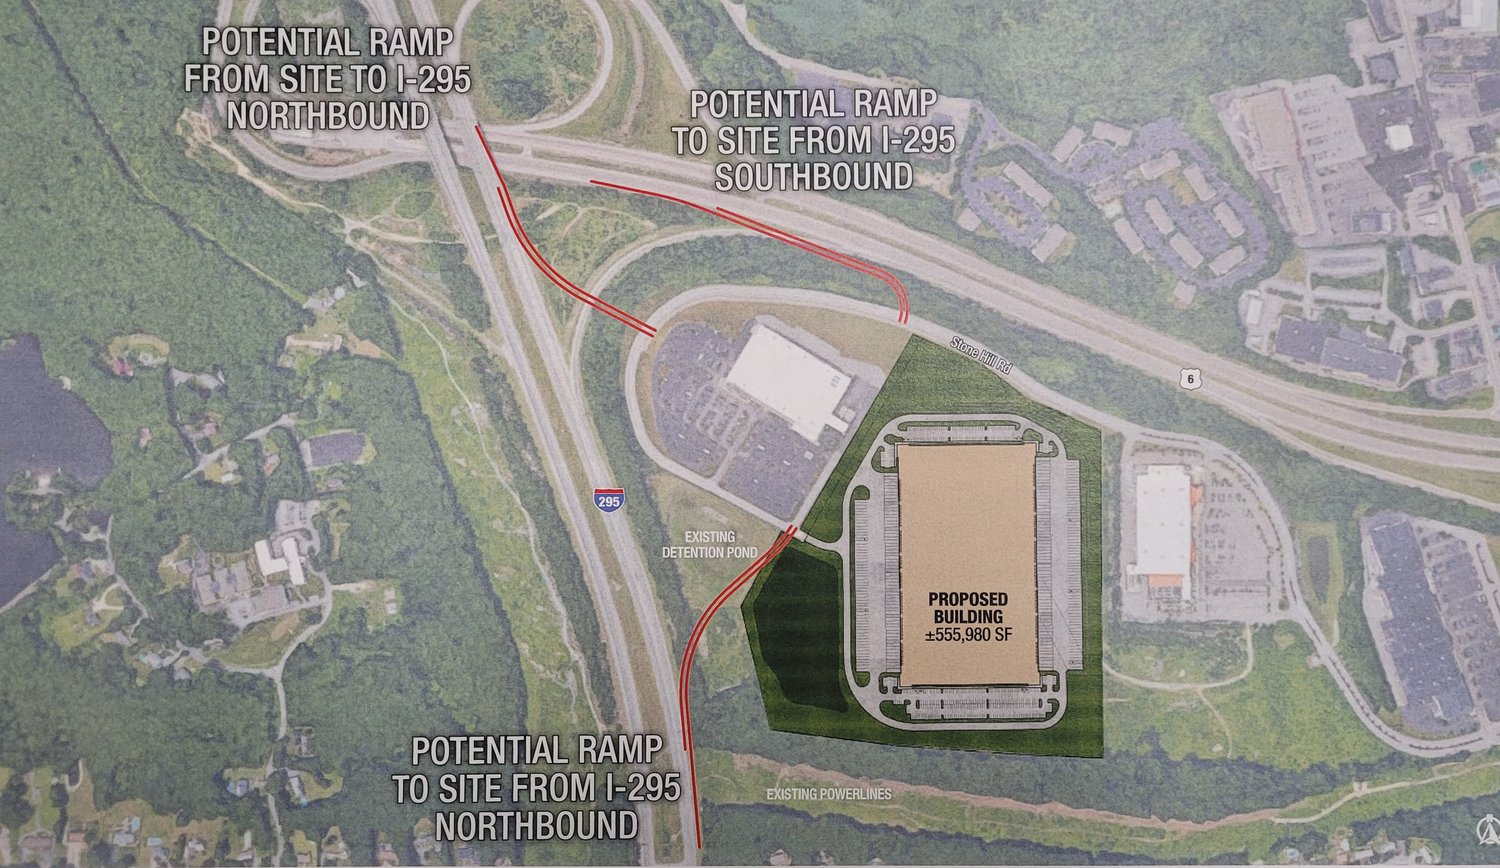 THE SITE: NorthPoint Development hopes to build the “I-295 Commerce Center,” a $75 million, 555,980 square foot warehouse facility off Stonehill Drive, between the Home Depot and the BJ’s Wholesale Club in Johnston. This image depicts possible new access routes to the facility. The additional exits will require state, and possibly federal, approval.